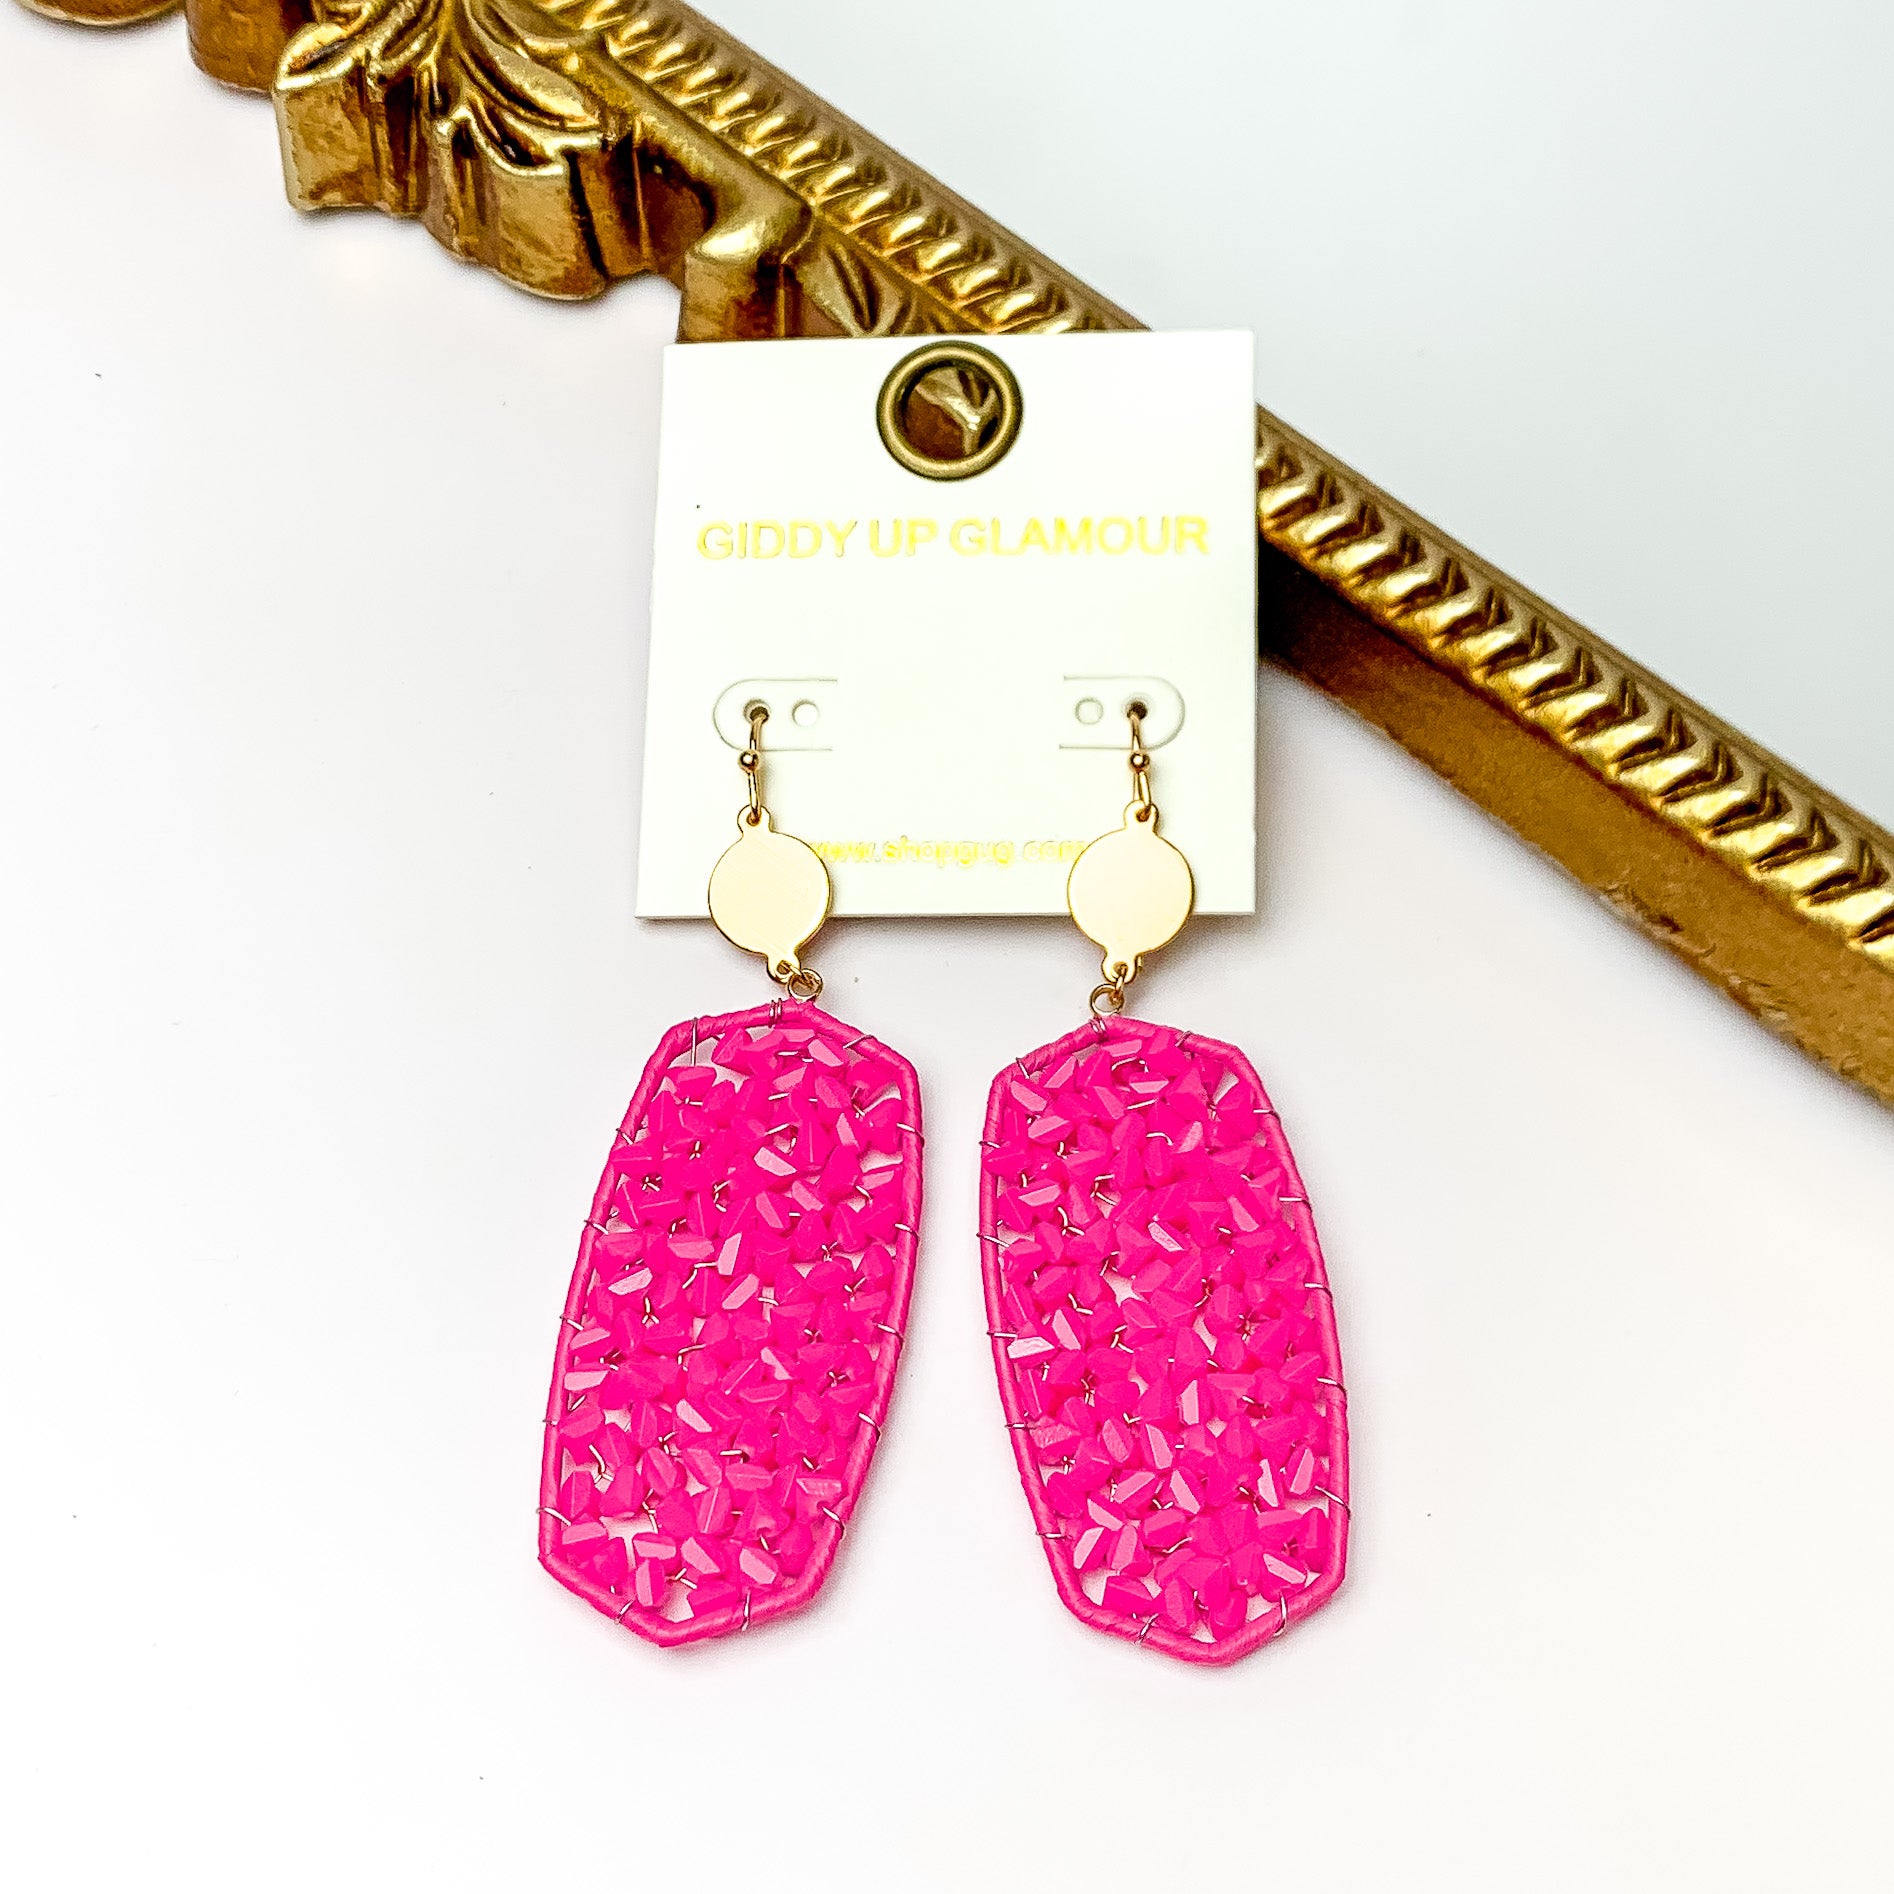 Hot Pink Large Drop Earring with Gold Tone Accessory. Pictured on a white background with a gold frame through it.